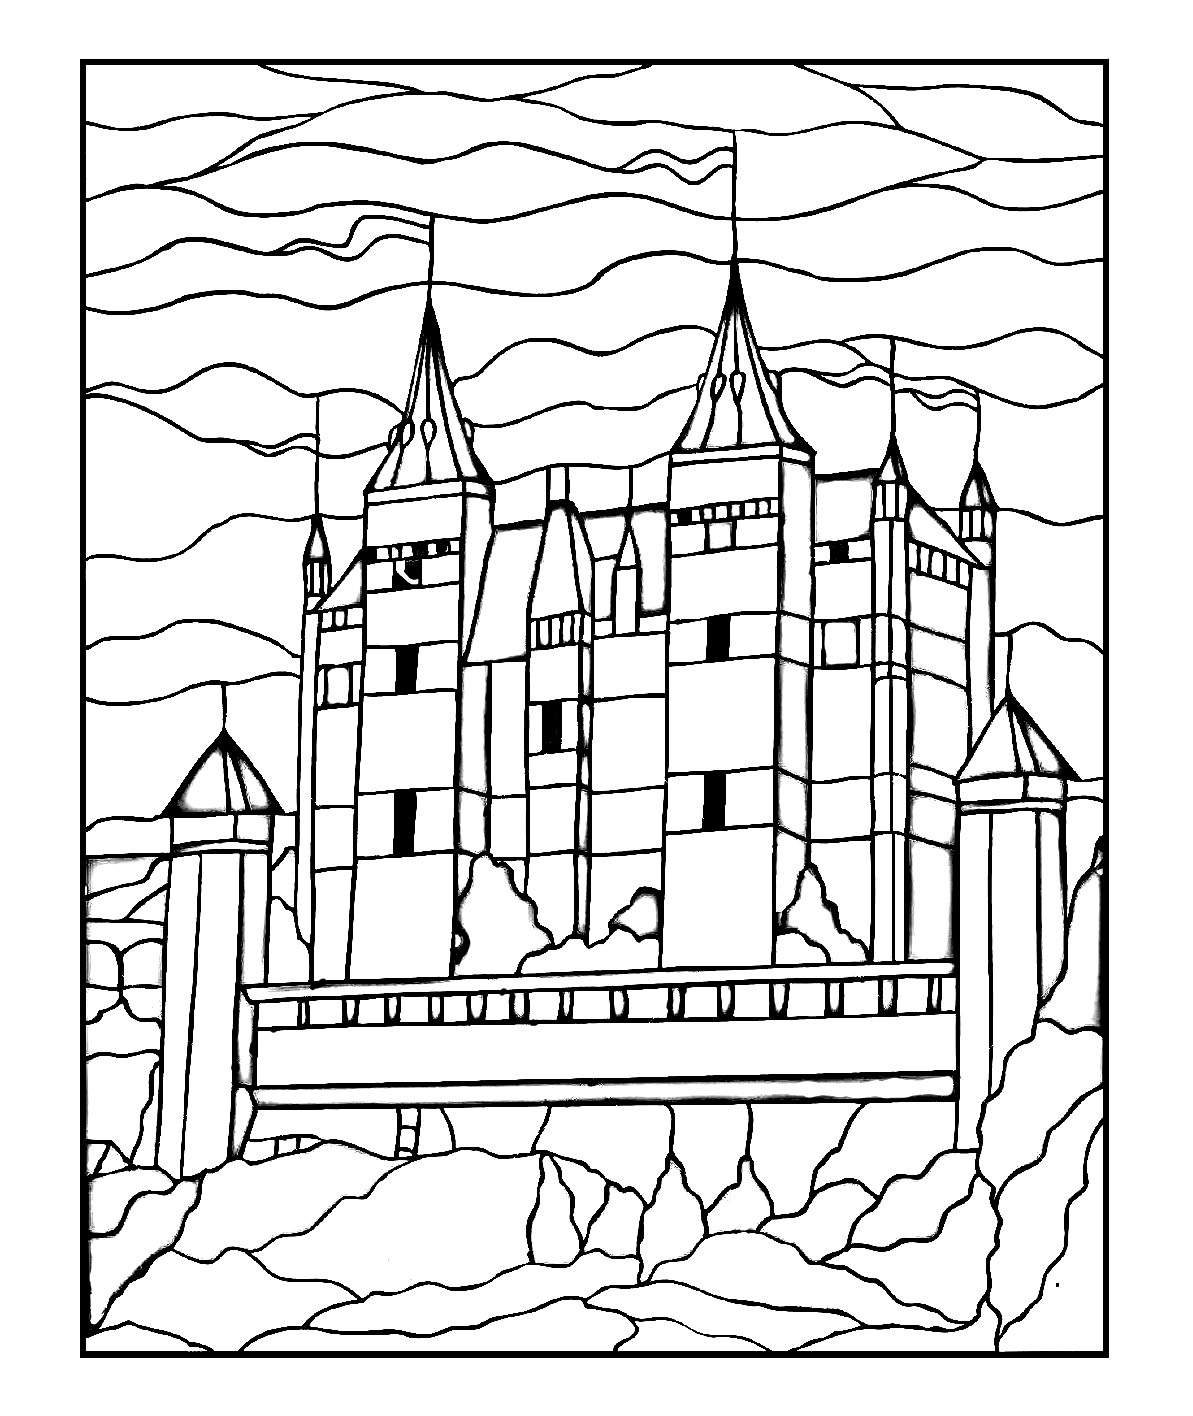 Adult coloring page with few details for kids